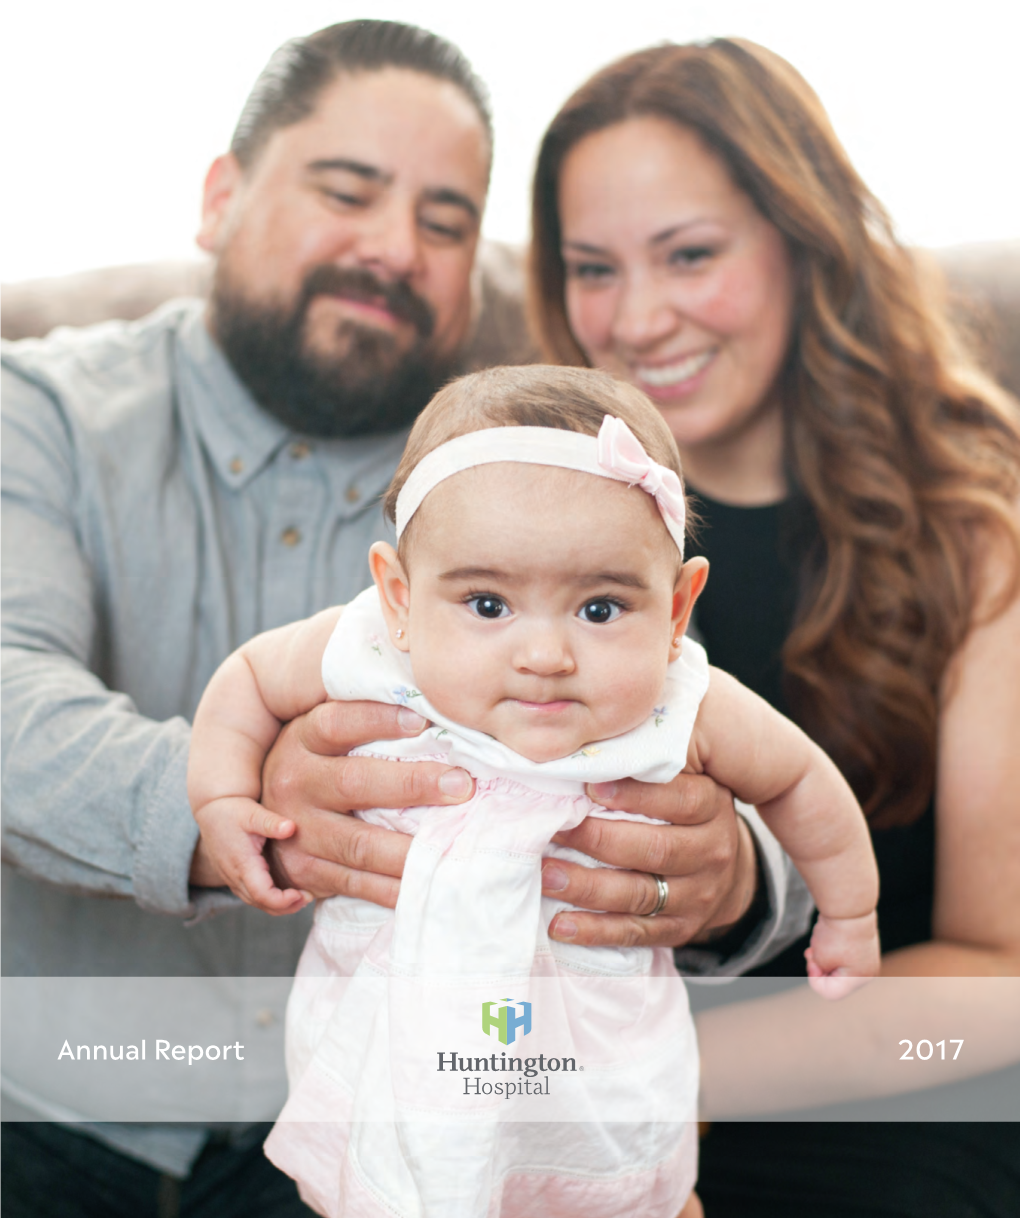 Annual Report 2017 a TRUSTED LEADER